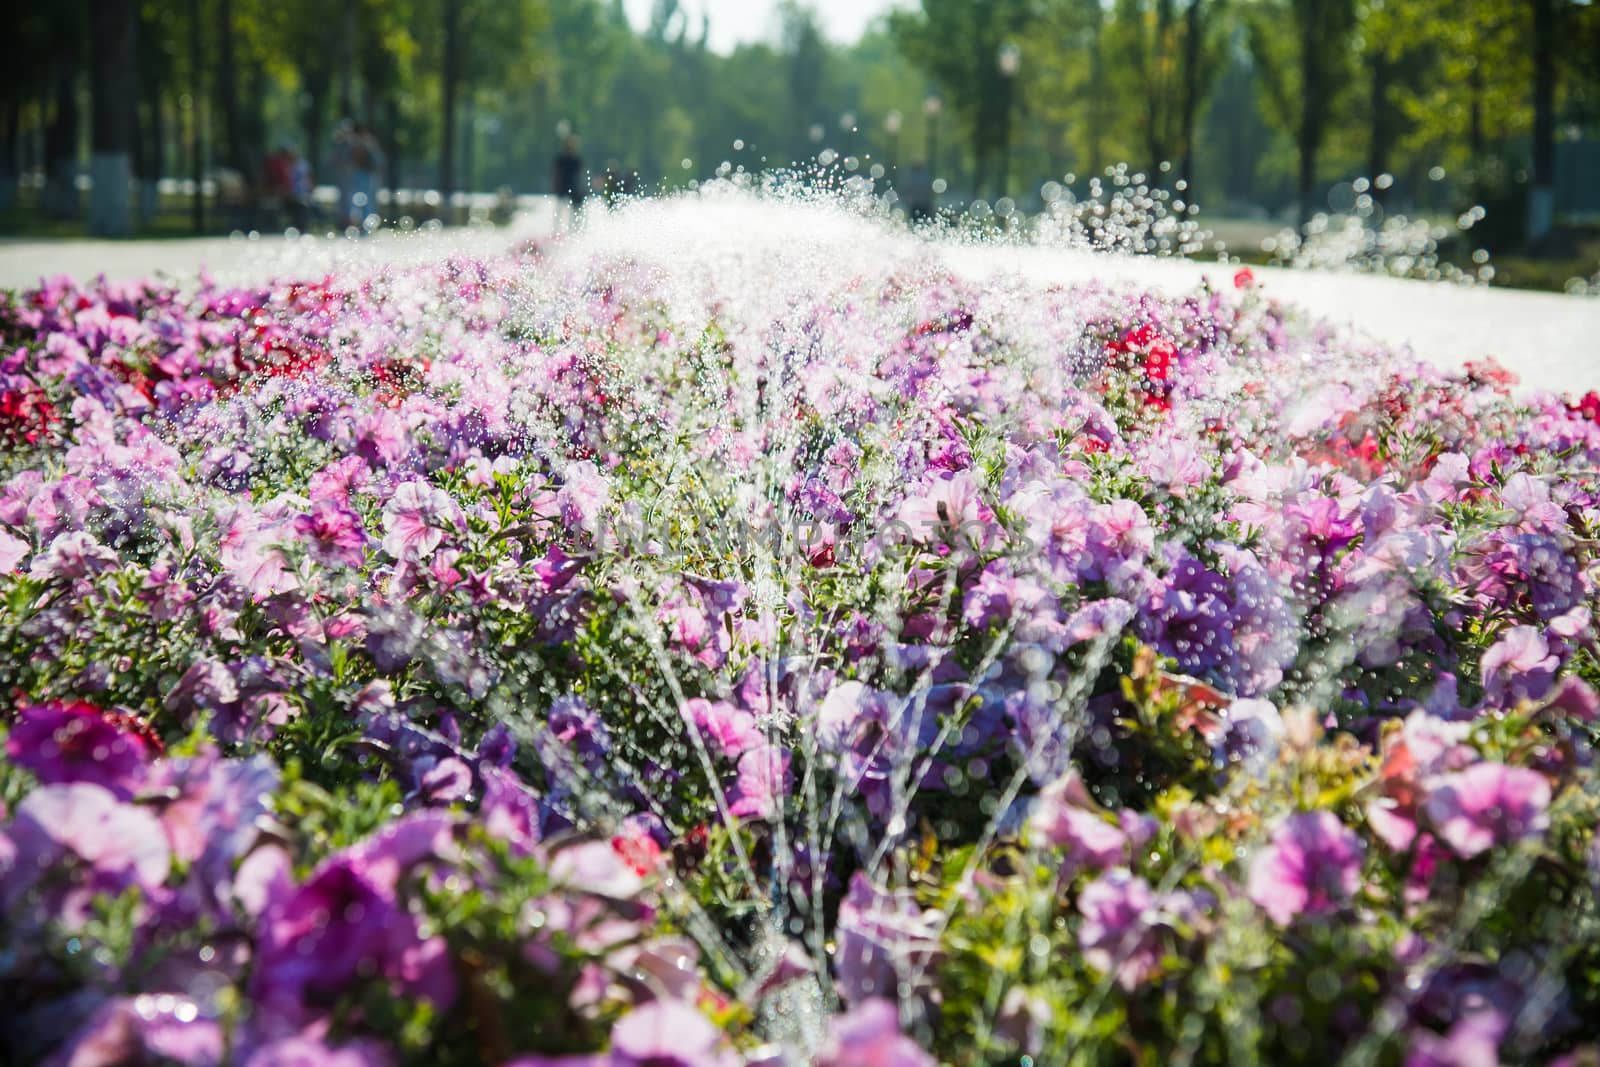 Watering lawn and flowers in the morning in park by grigorenko